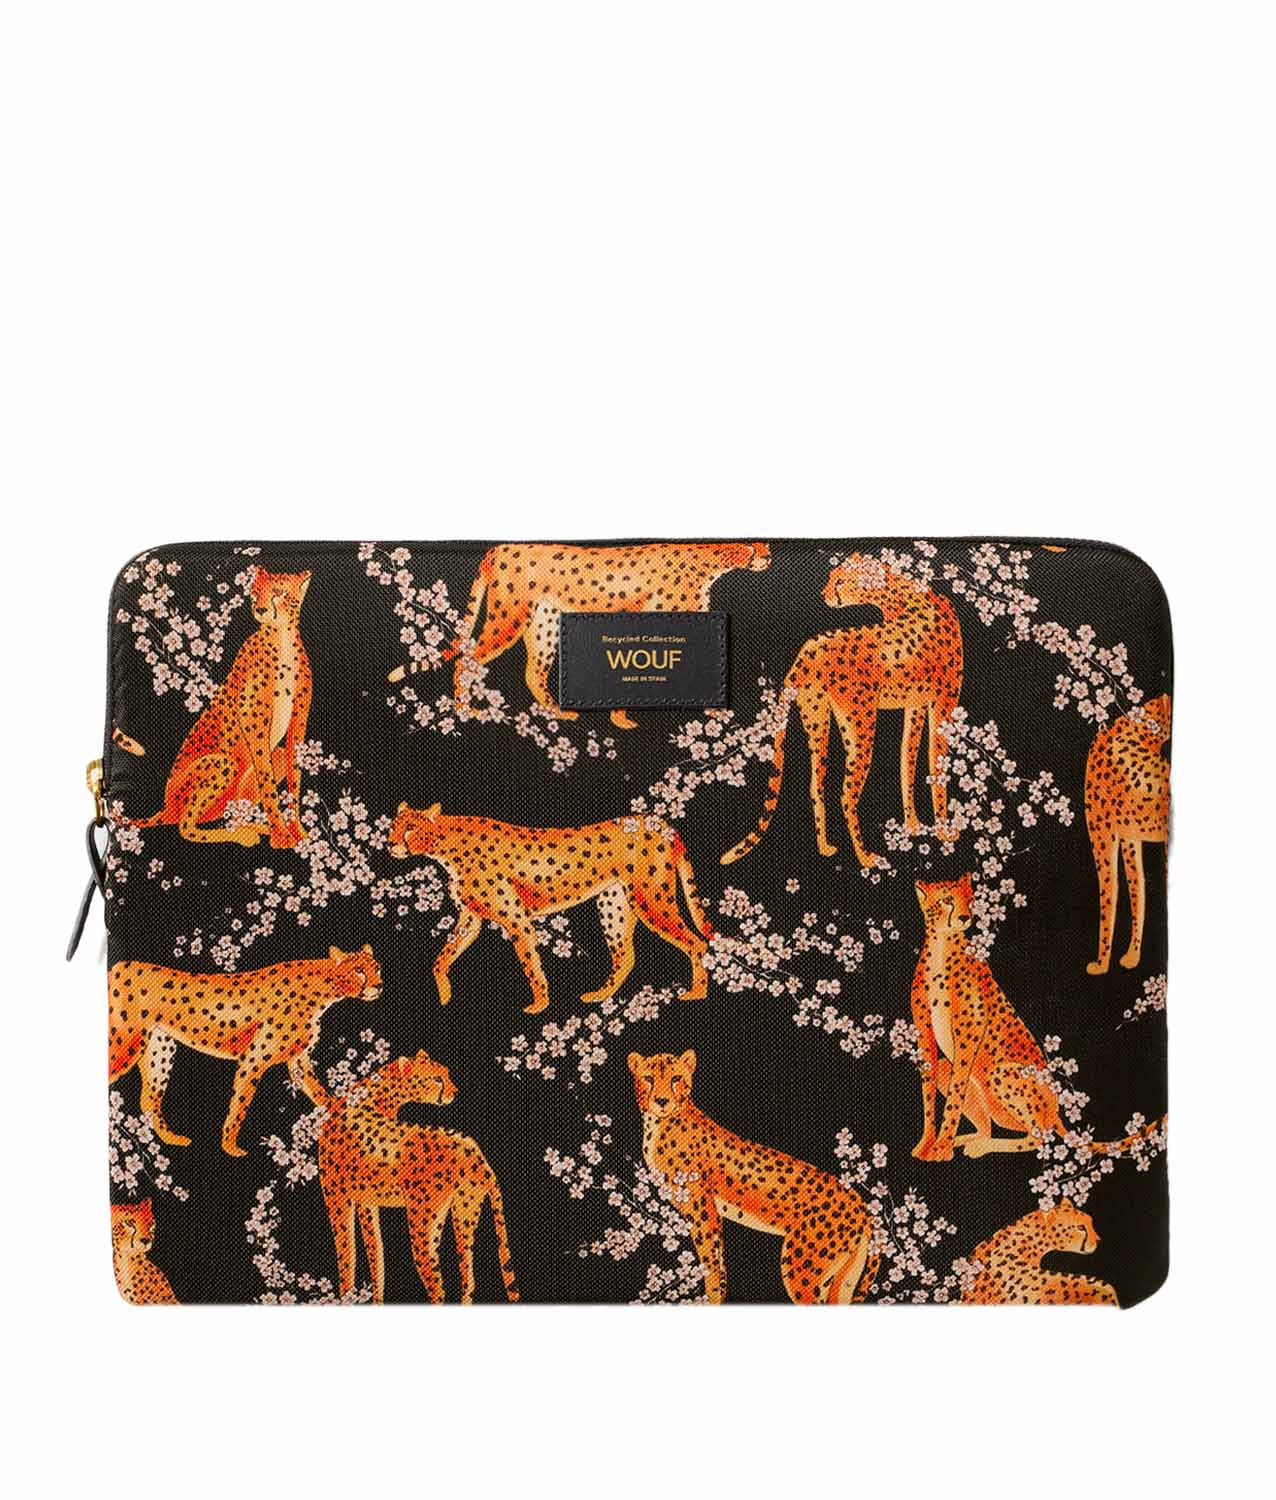 wouf-salome-13-14inch-laptop-sleeve